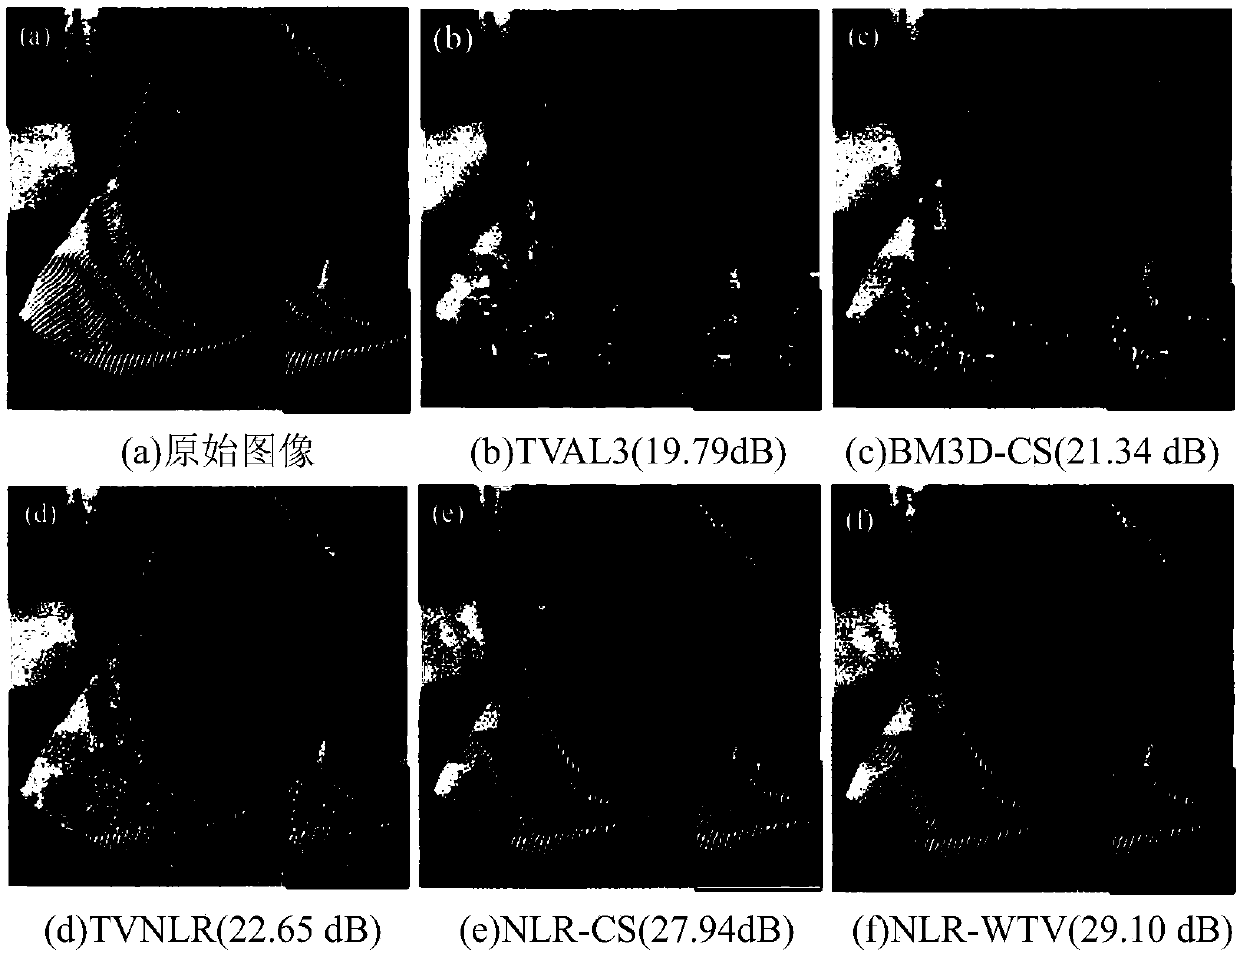 An image compressed sensing reconstruction algorithm based on non-local low rank and total variation